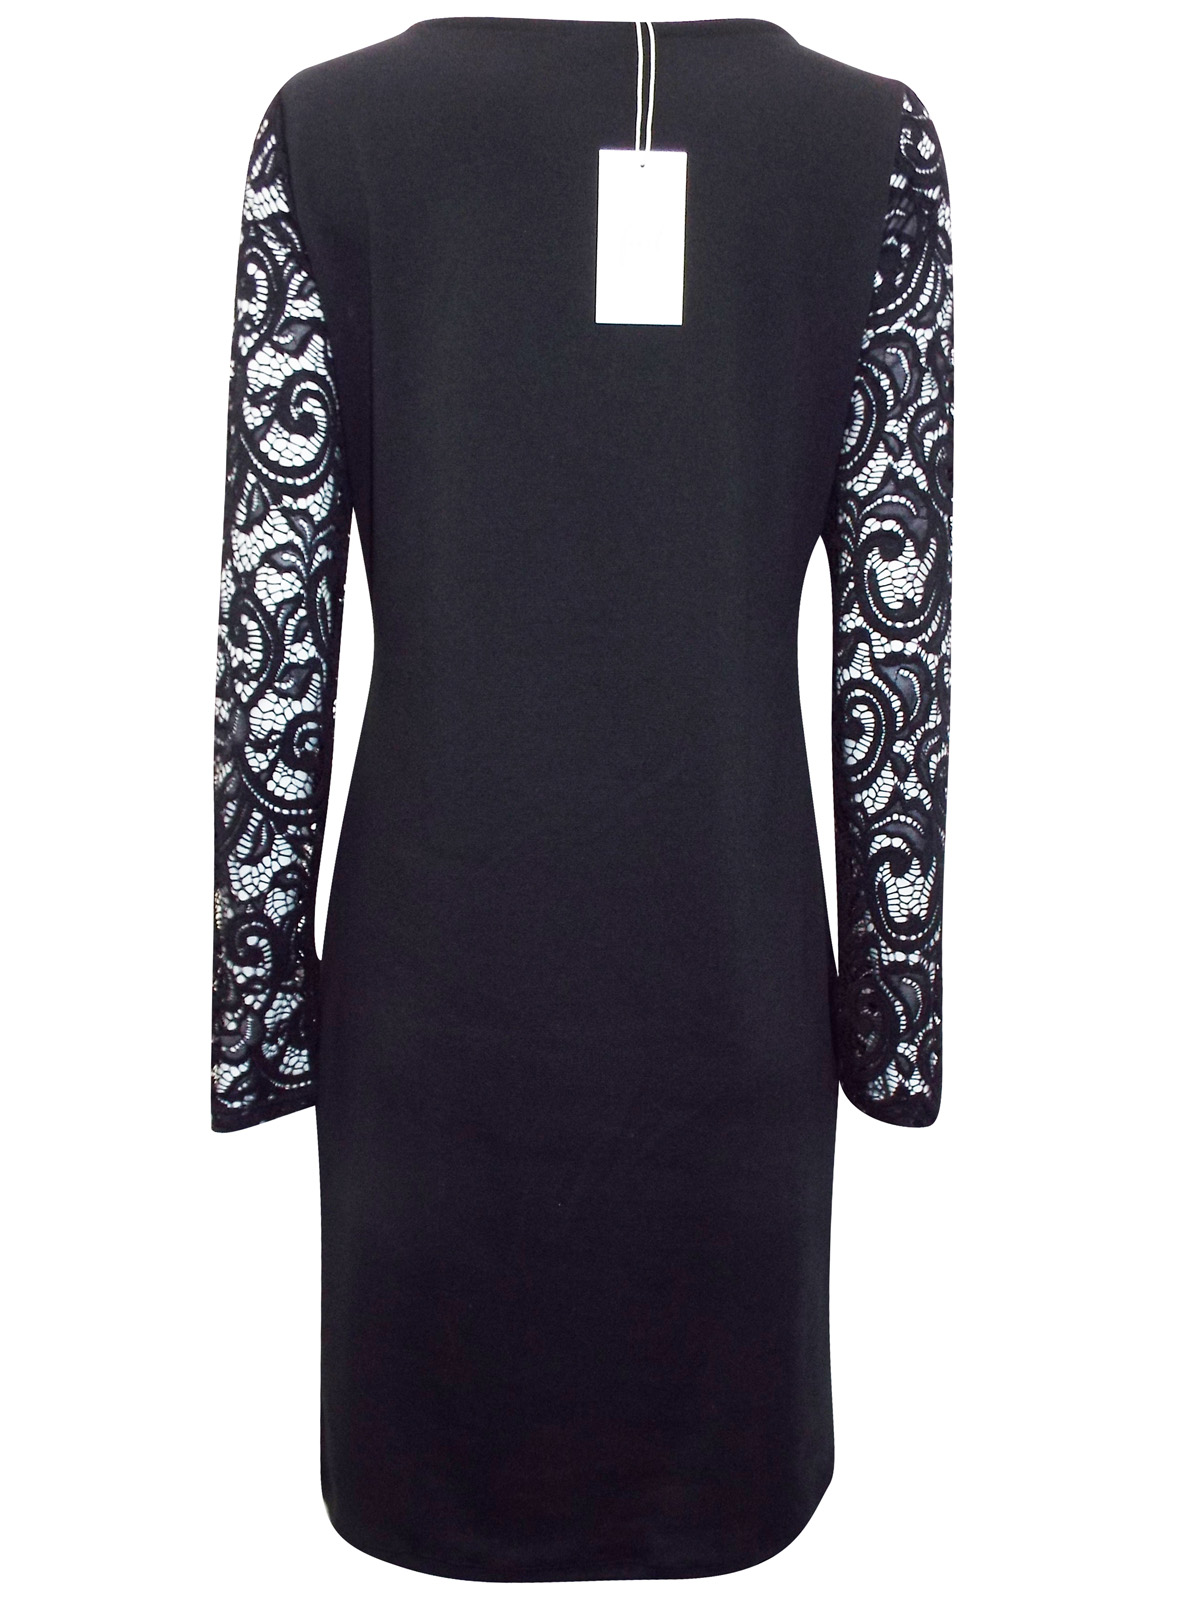 First Avenue BLACK Sheer Sleeve Lace Panelled Dress - Size 10 to 20